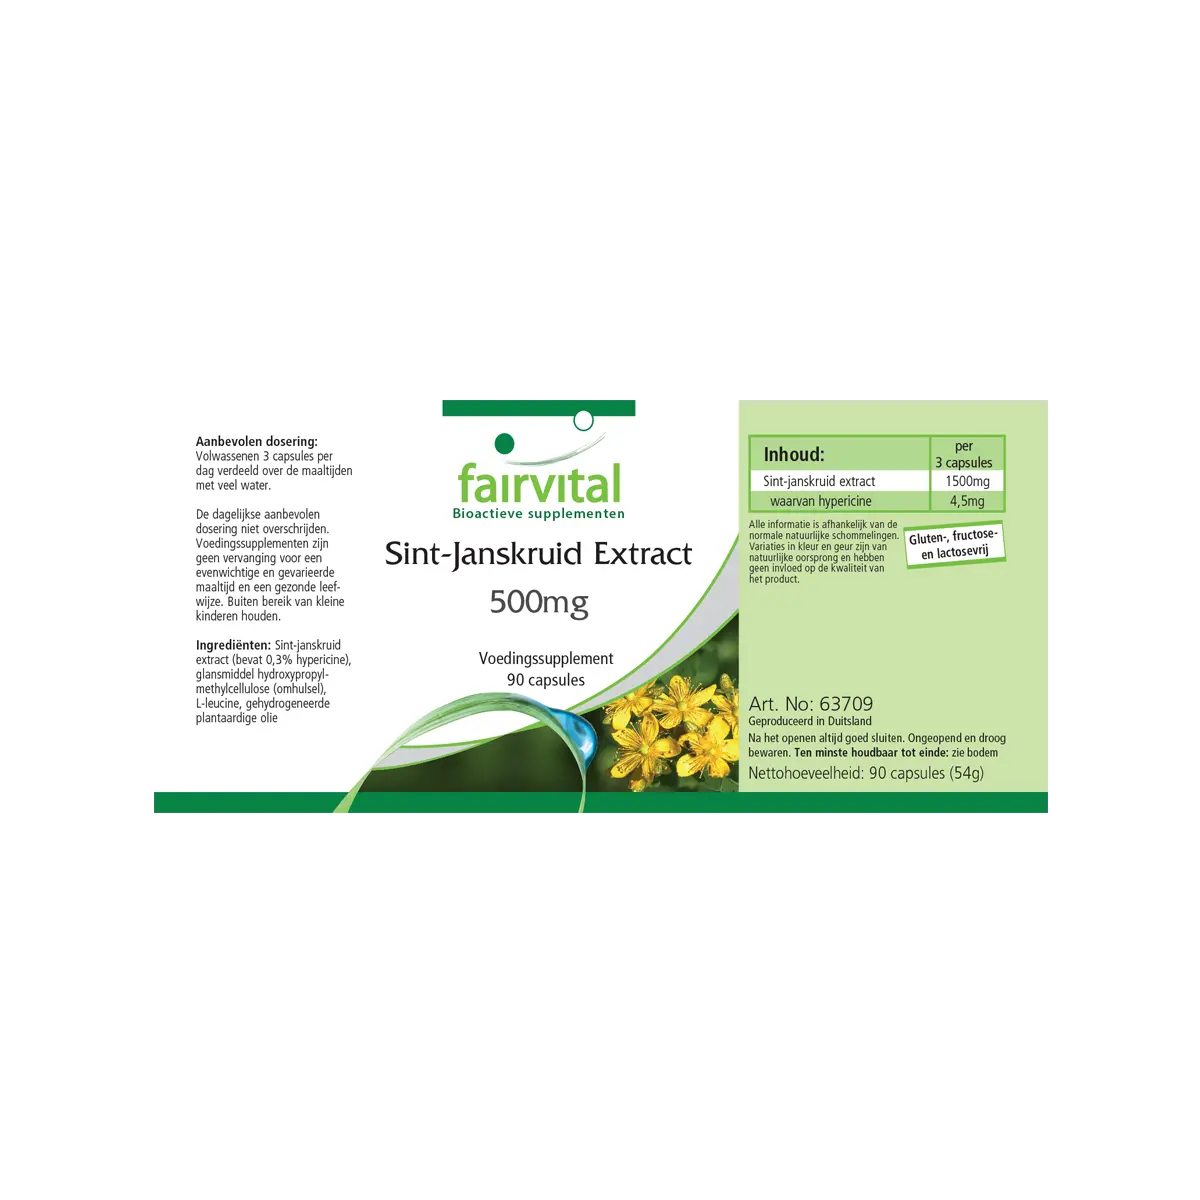 St John´s wort extract 500mg with hypericin - 90 capsules